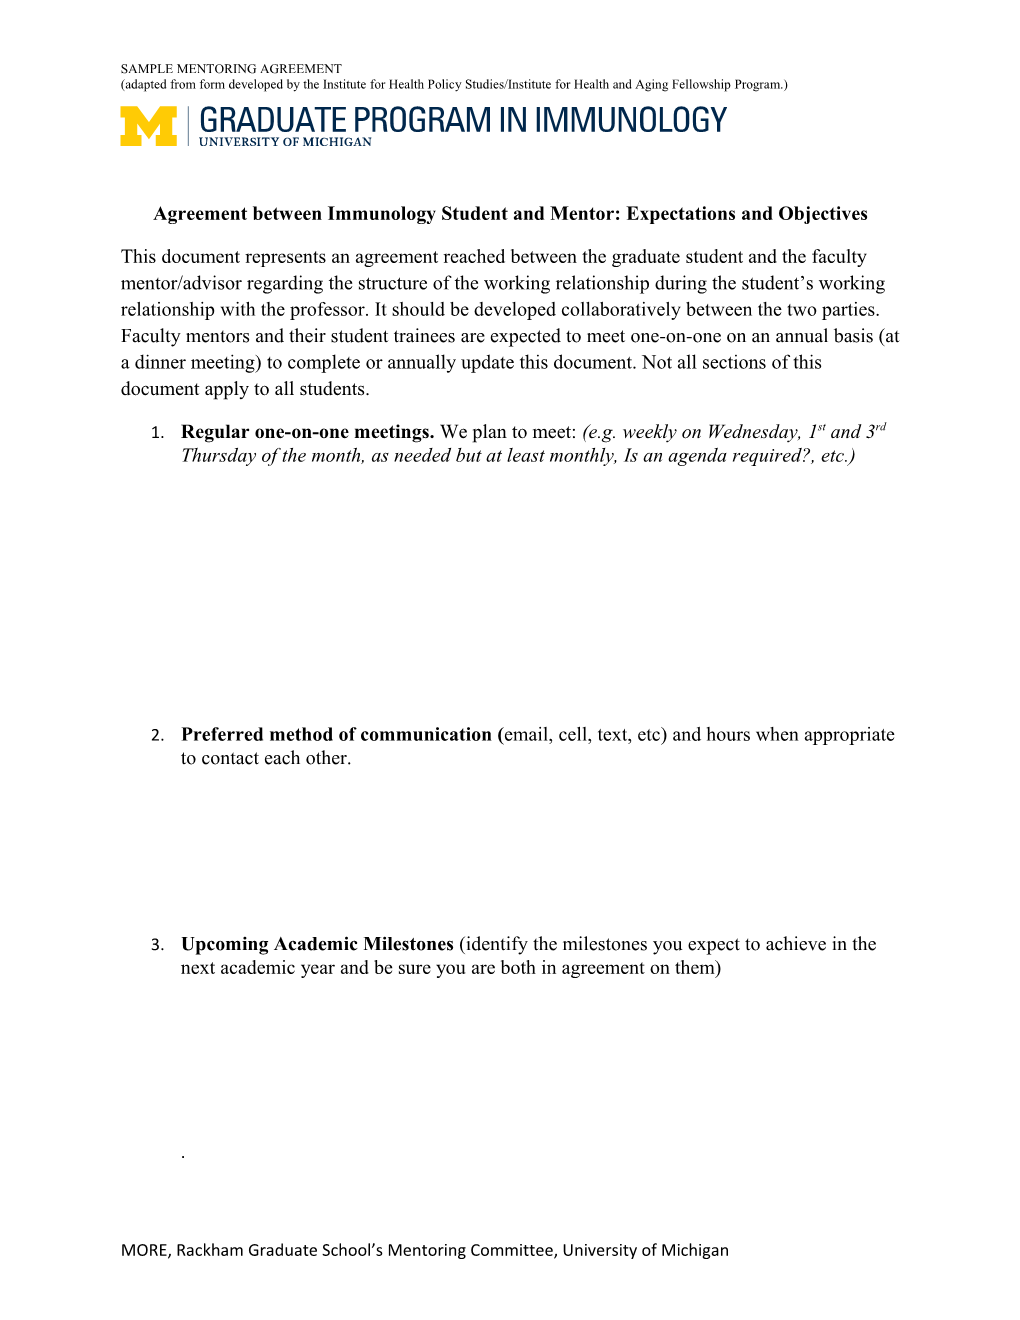 Agreement Between Immunologystudent and Mentor: Expectations and Objectives